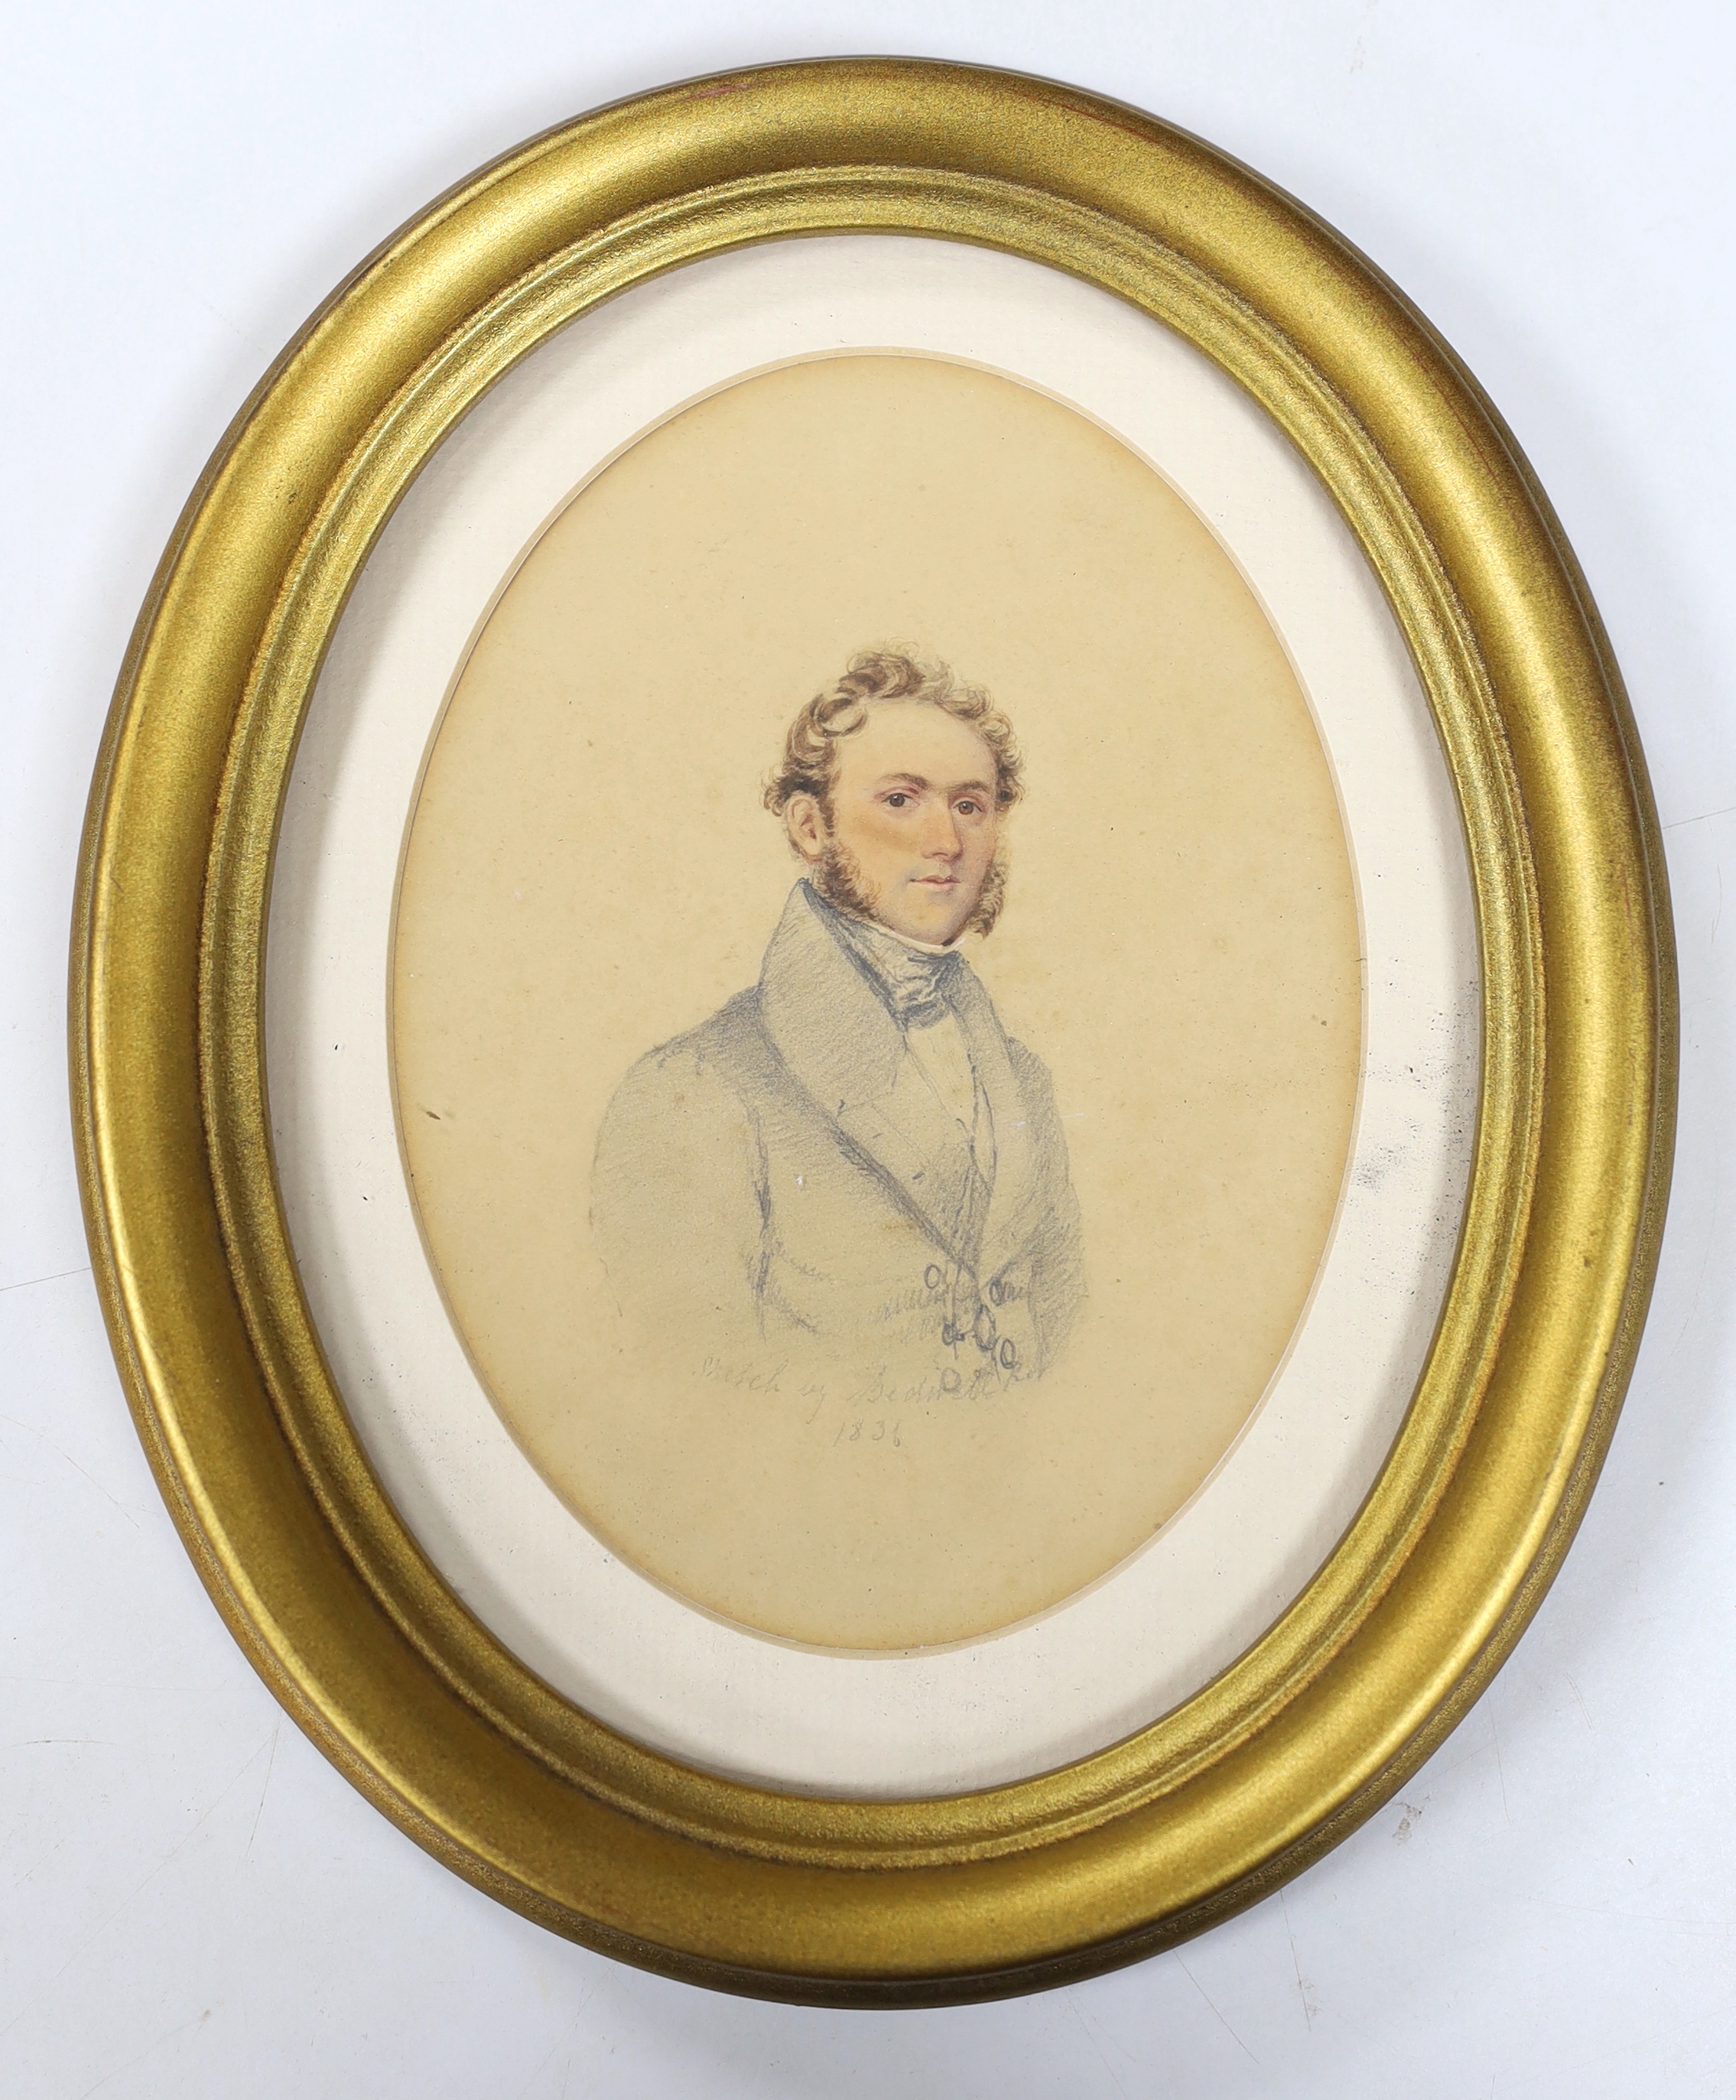 Early 19th century English School, pencil and watercolour, Portrait of a gentleman, indistinctly inscribed and dated 1831, together with a 19th century heightened watercolour, River landscape with boat, ornate gilt frame